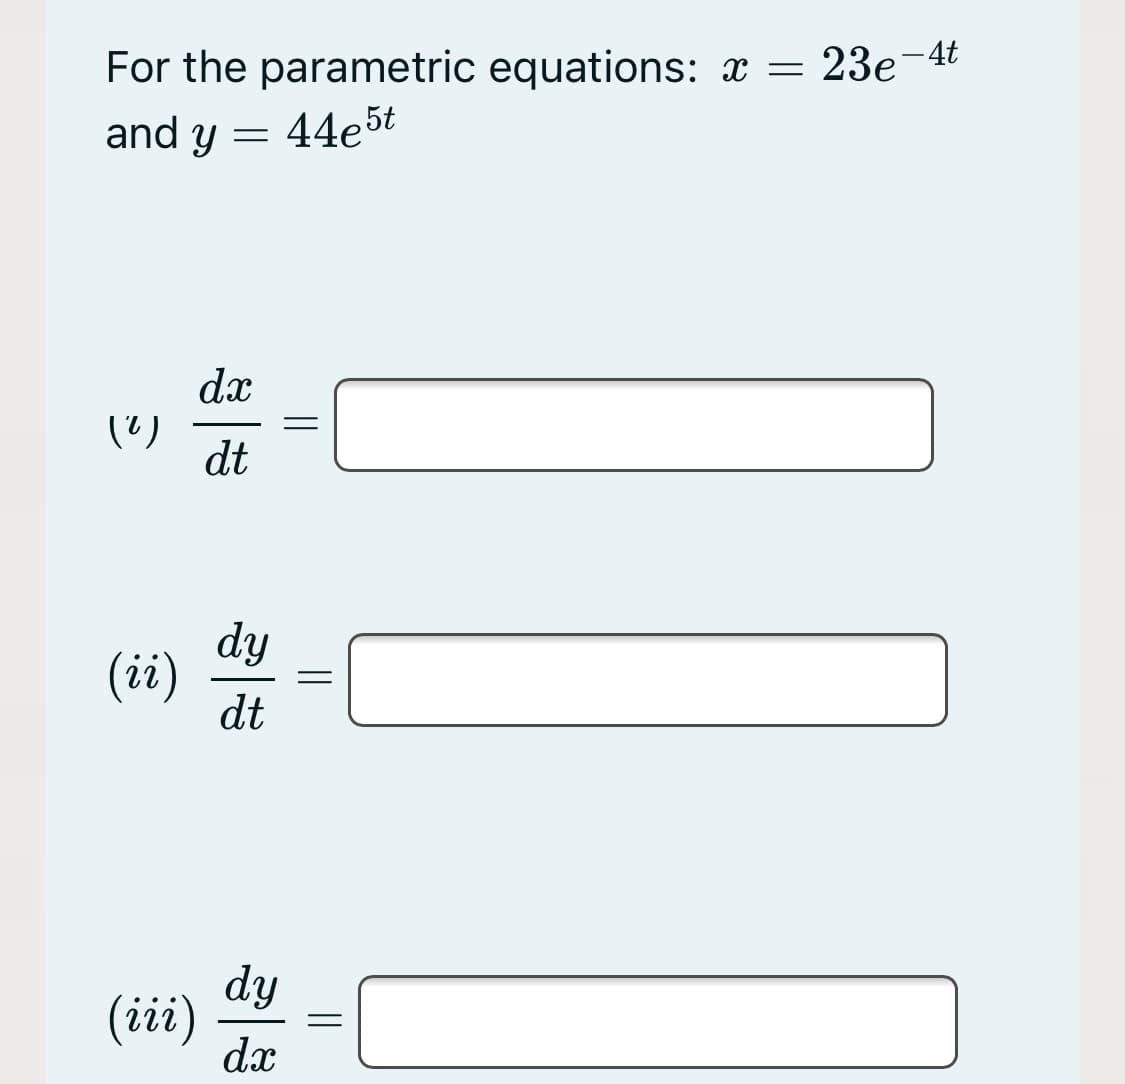 For the parametric equations: x = 23e¬4t
and y = 44e5t
dx
dt
dy
(ii)
dt
dy
(iii)
dx
